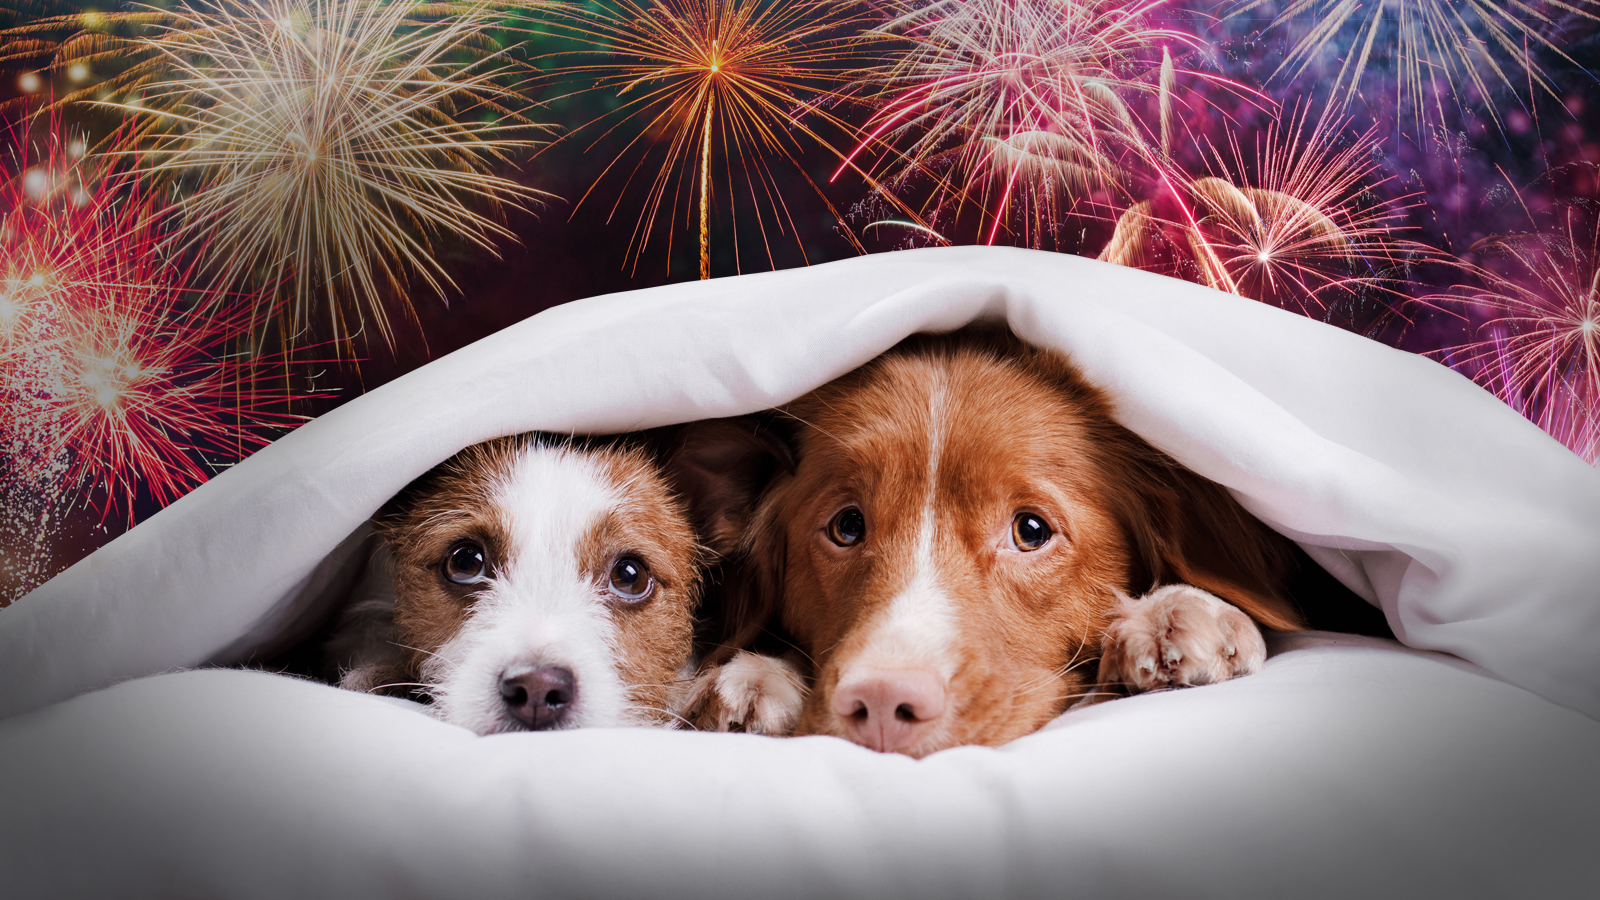 How to create a living room den for your pet on bonfire night